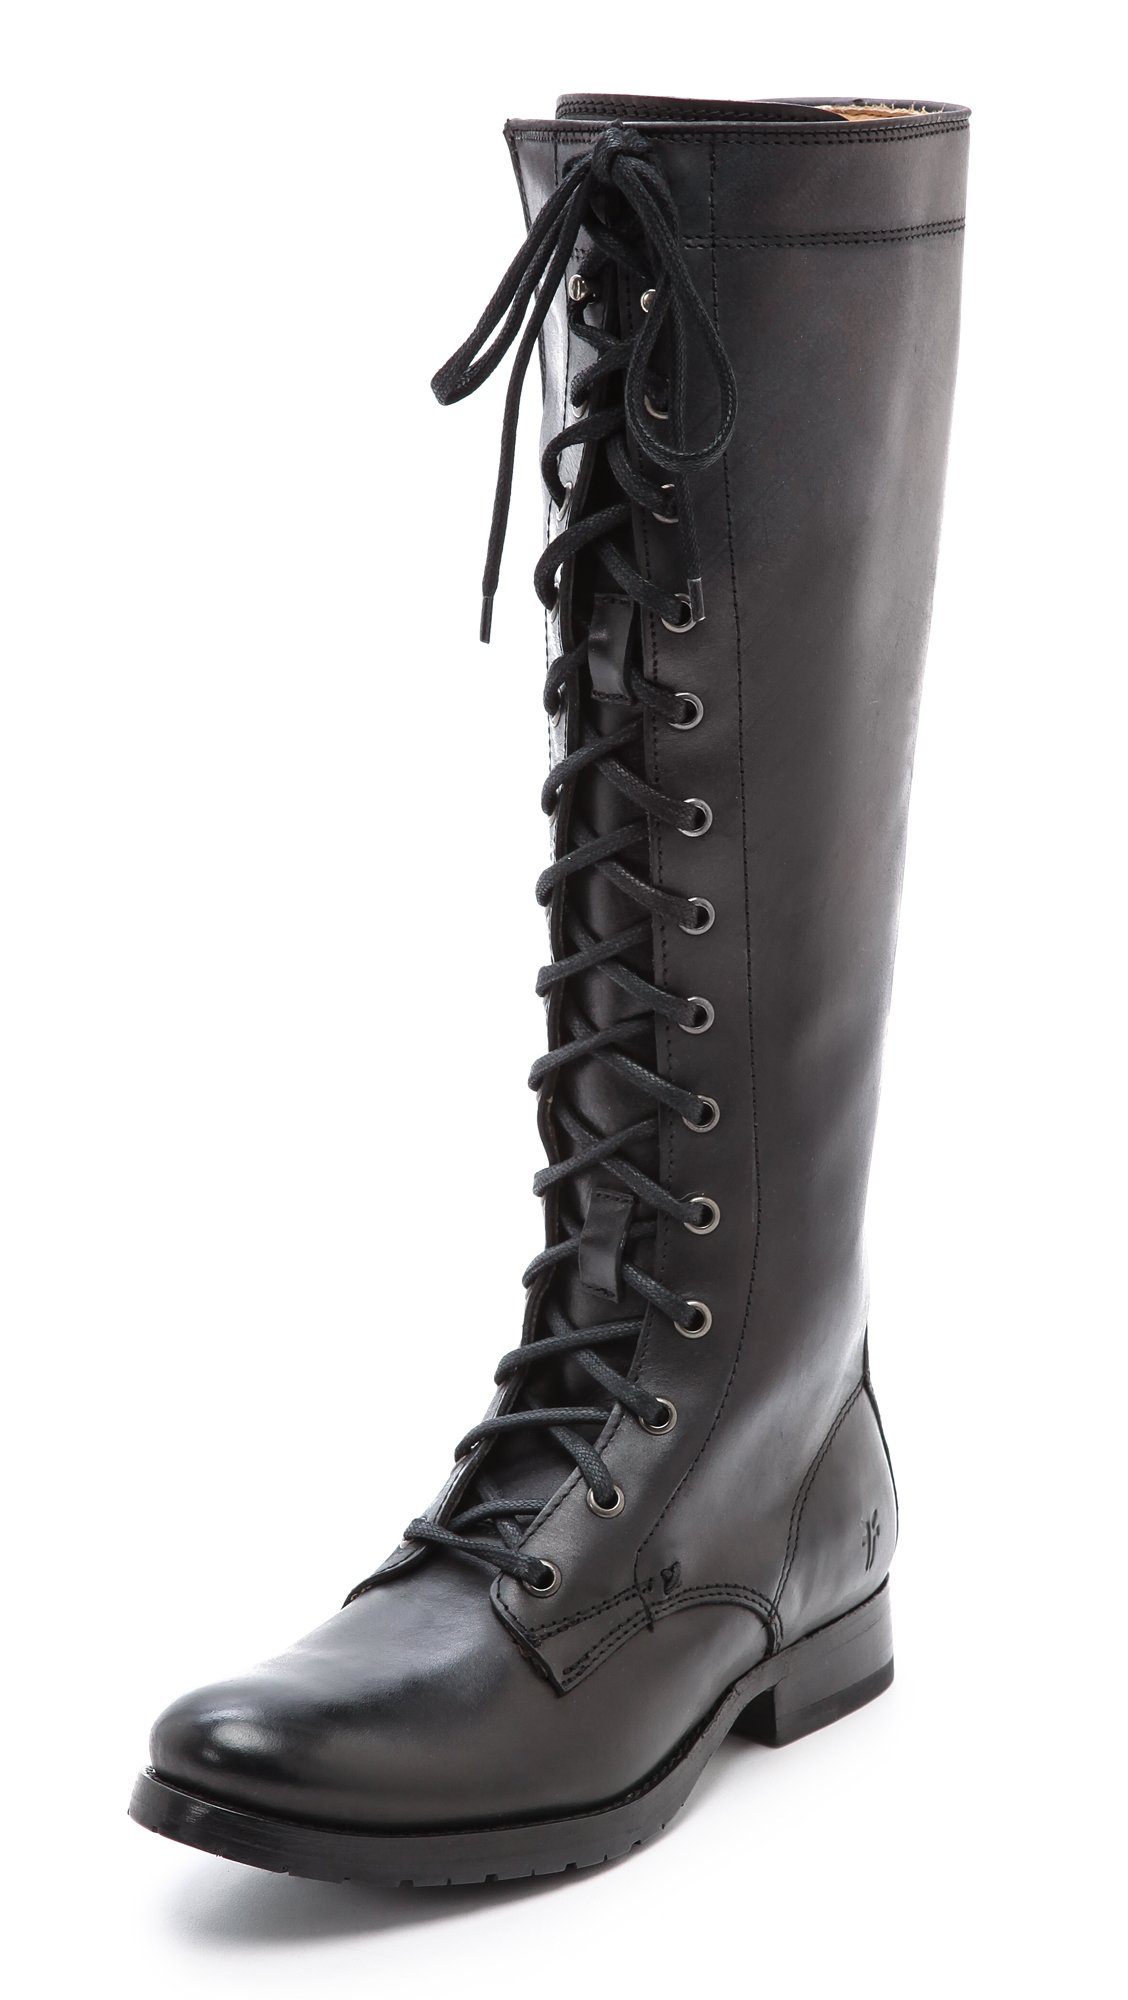 Lyst Frye Melissa Tall Lace Up Boots Black In Black